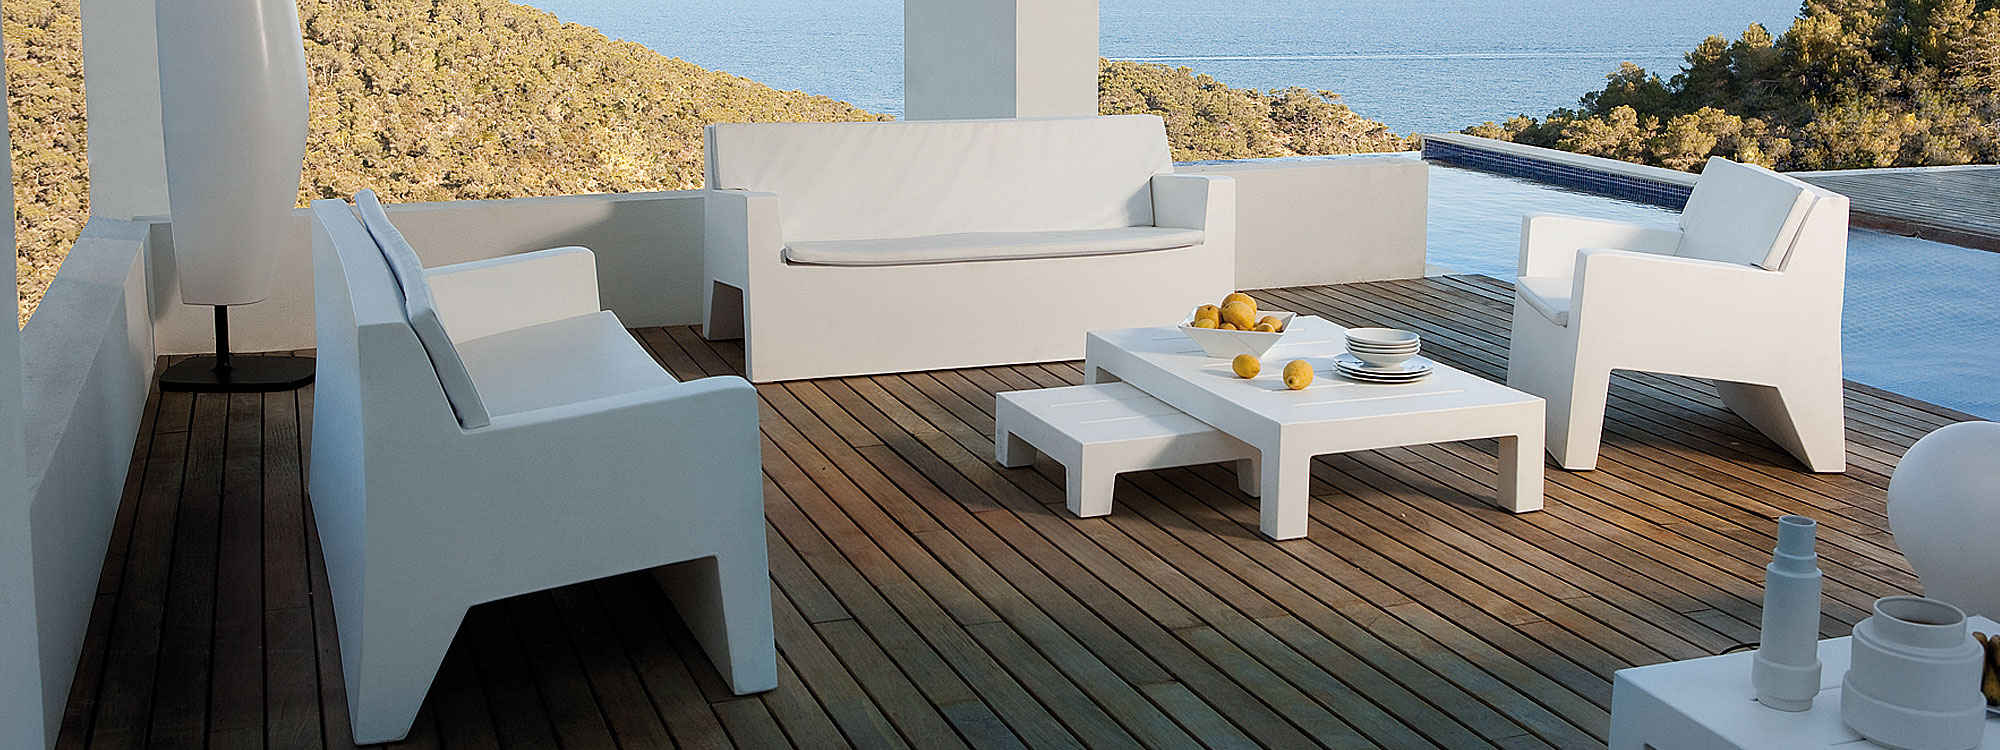 Image of white Jut modern plastic sofa, lounge chairs and low tables by Vondom, on covered pergola, with woodland and sea in the background